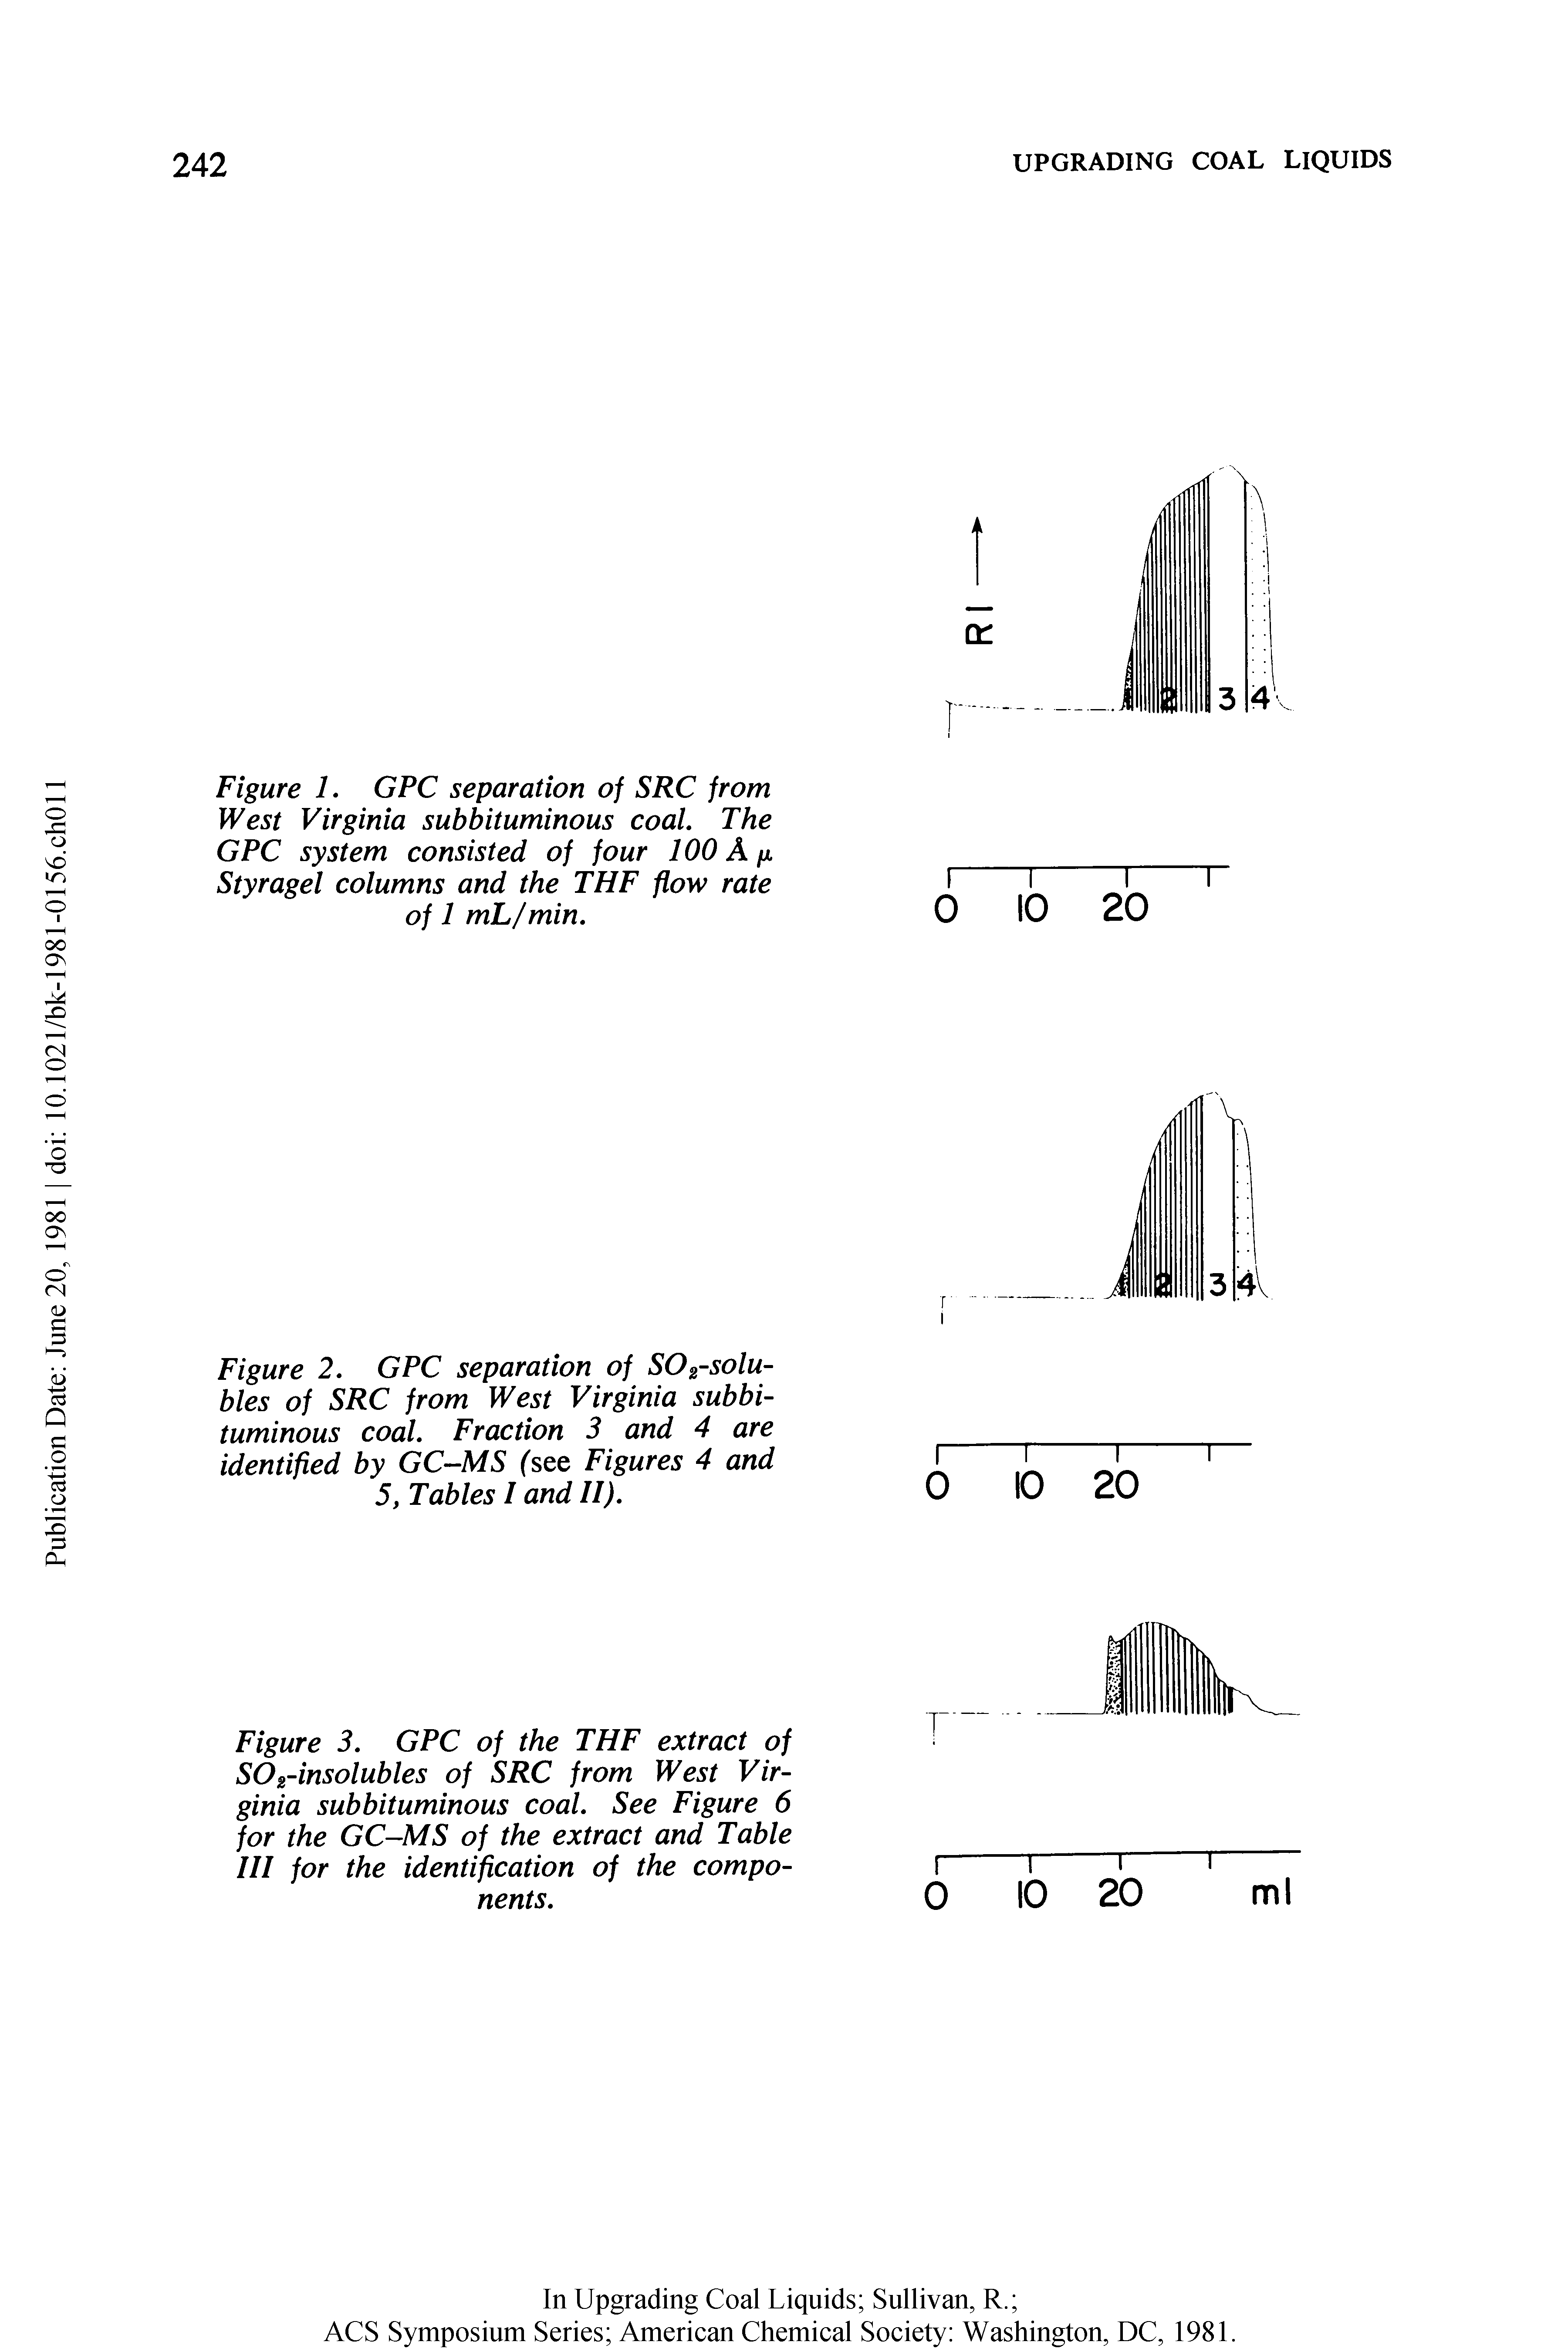 Figure 1. GPC separation of SRC from West Virginia subbituminous coal. The GPC system consisted of four 100 A n Styragel columns and the THF flow rate of 1 mL/min.